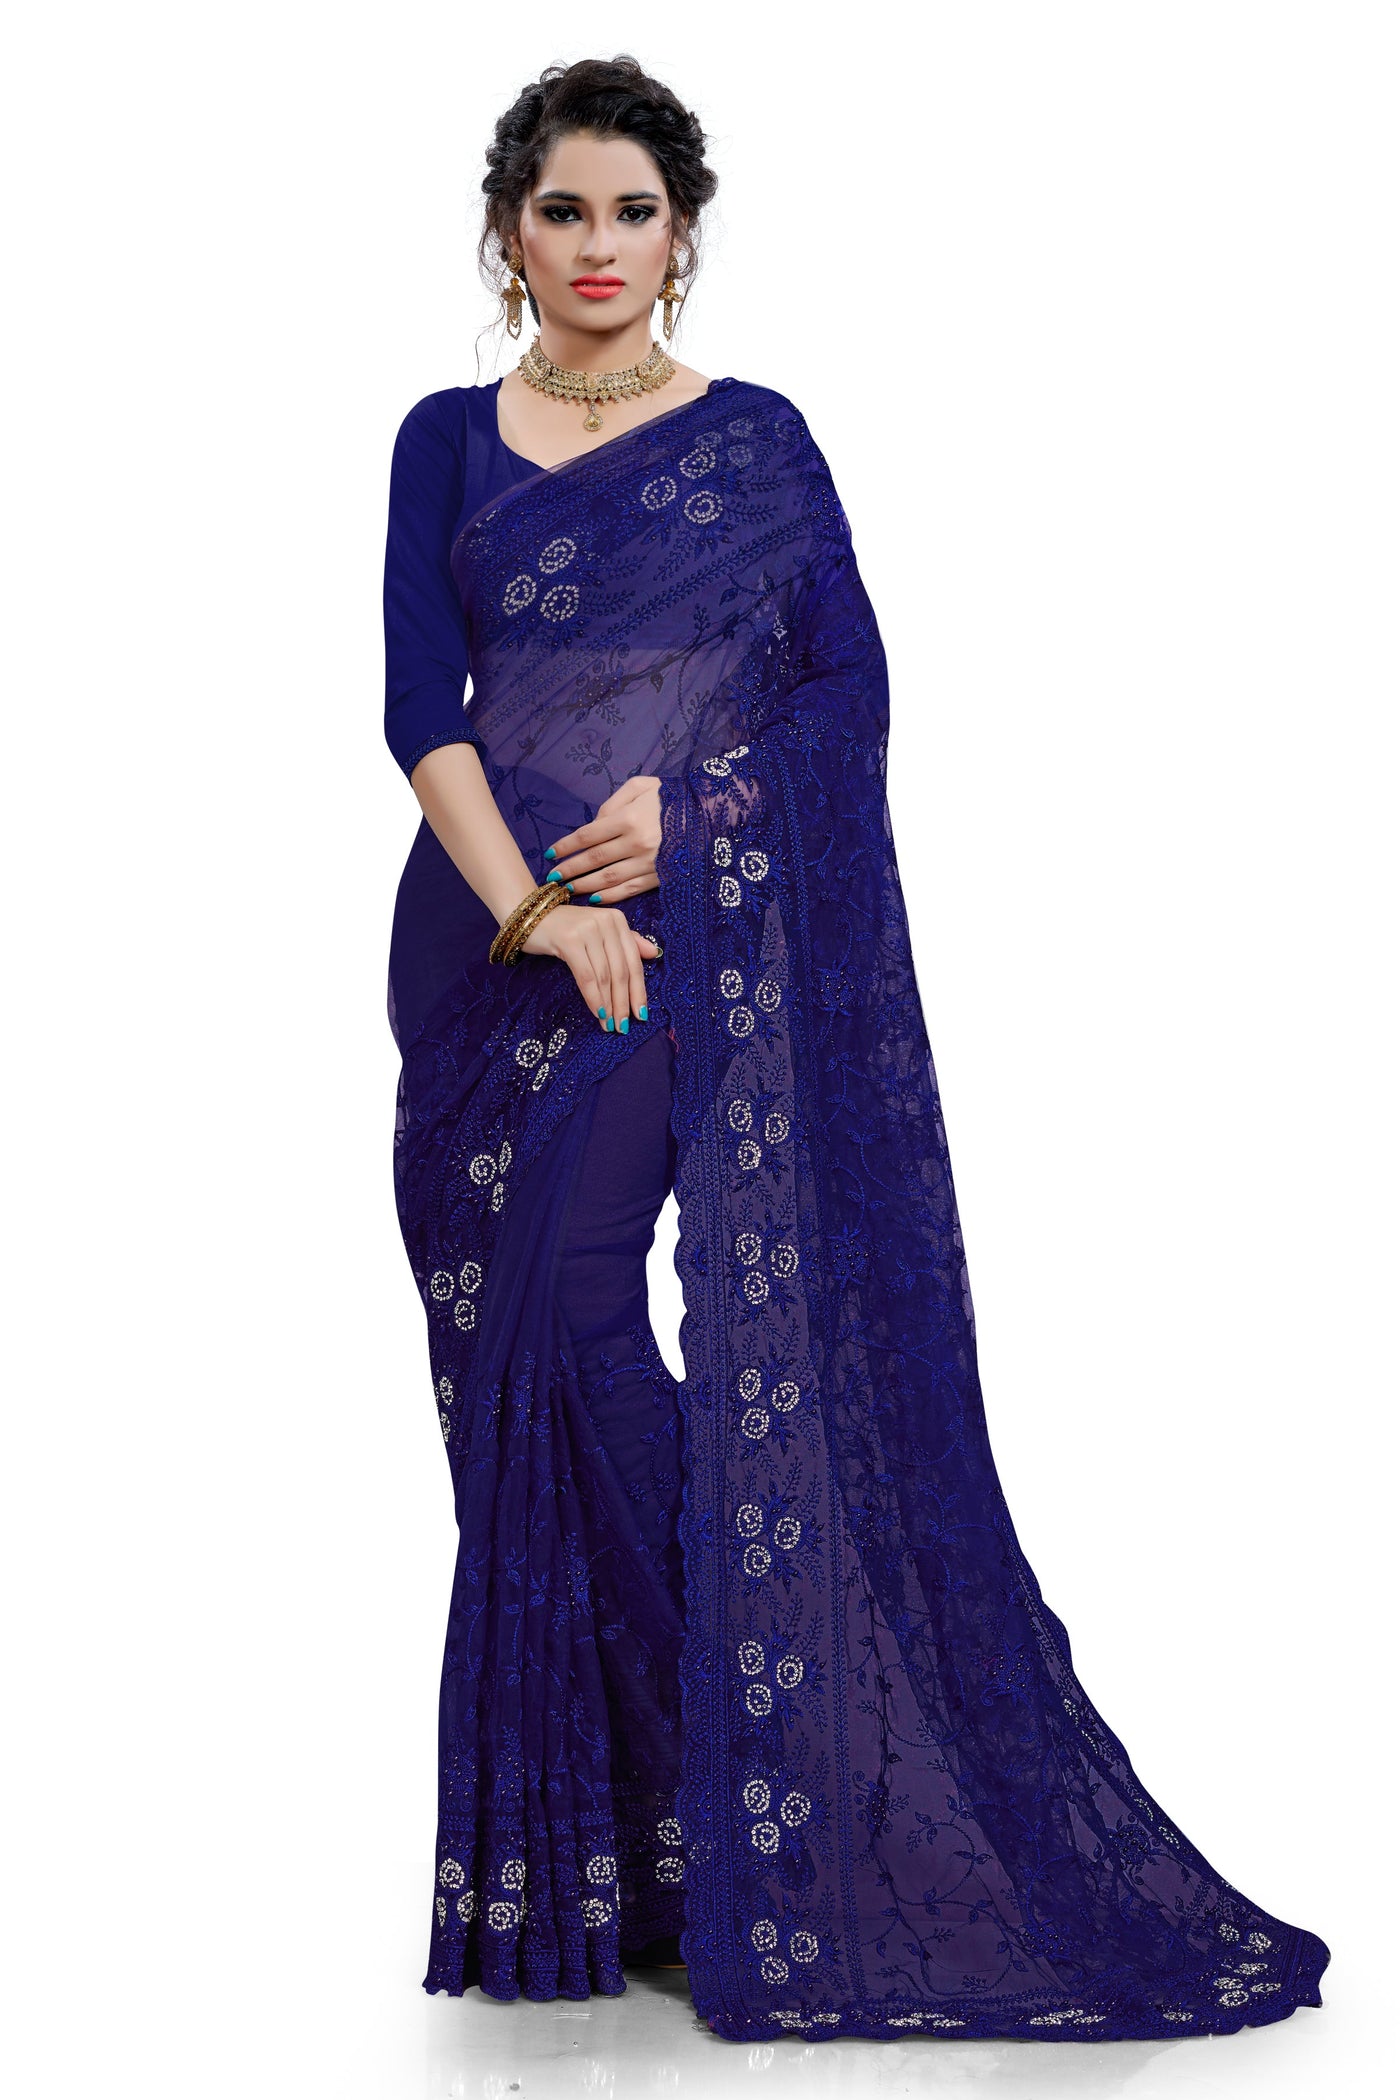 Net Blue Saree With Blouse